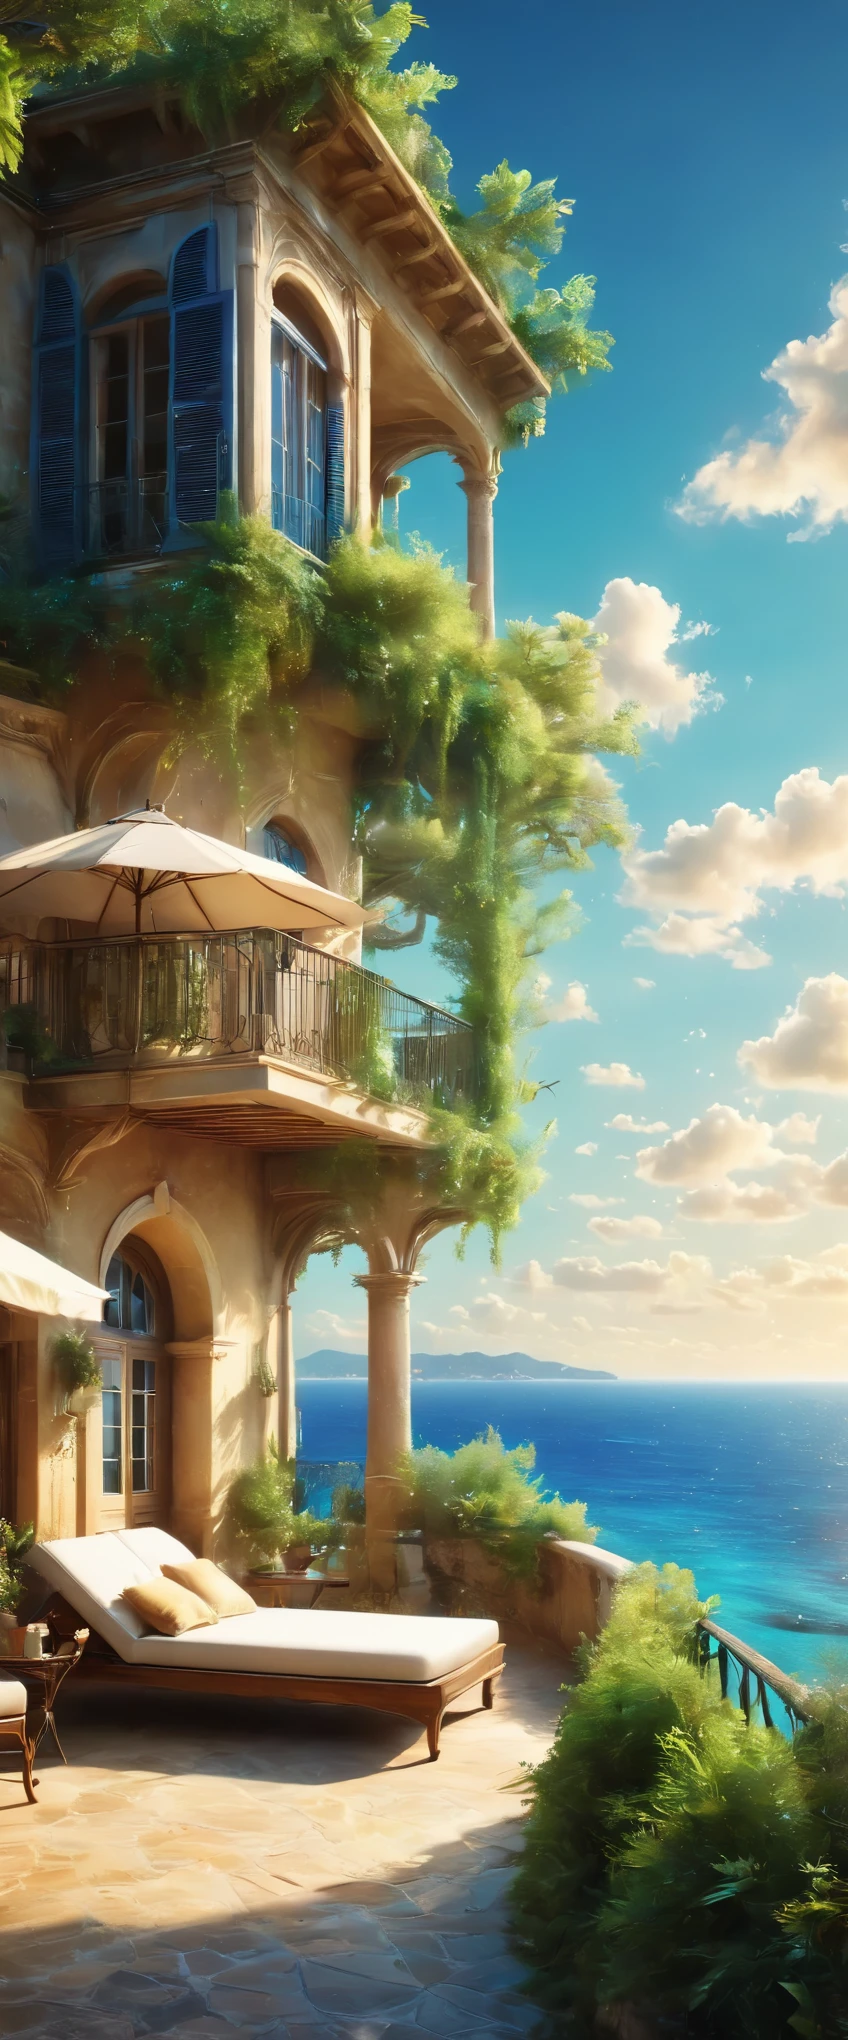 Cote d&#39;Azur:South of France:A coastline known as a scenic resort,Resort scenery,holiday,美しい風景photograph,Fantasy,Dreamy,Beautiful sea,高品質でwonderful家具:Designer furniture,A beautiful sky spreads out,dream-like,summer,cloud,Sky blue,Marine blue,wonderful景色が広がる,Luxury Resorts,Extravagant space,Soft mouth cap,Surrounded by abundant nature,Highestの時間をあなたに,Highest品質,photograph,Structurally correct,Perfect composition,広告用に撮影されたphotograph,Beautiful light and shadow,Photographed by a professional photographer,Highestのリゾート地に選ばれた,Rich colors,Cast colorful spells,detailed,wonderful,wonderful,South of France,Light effects,Glitter,reflection,night,night空,star,Highest